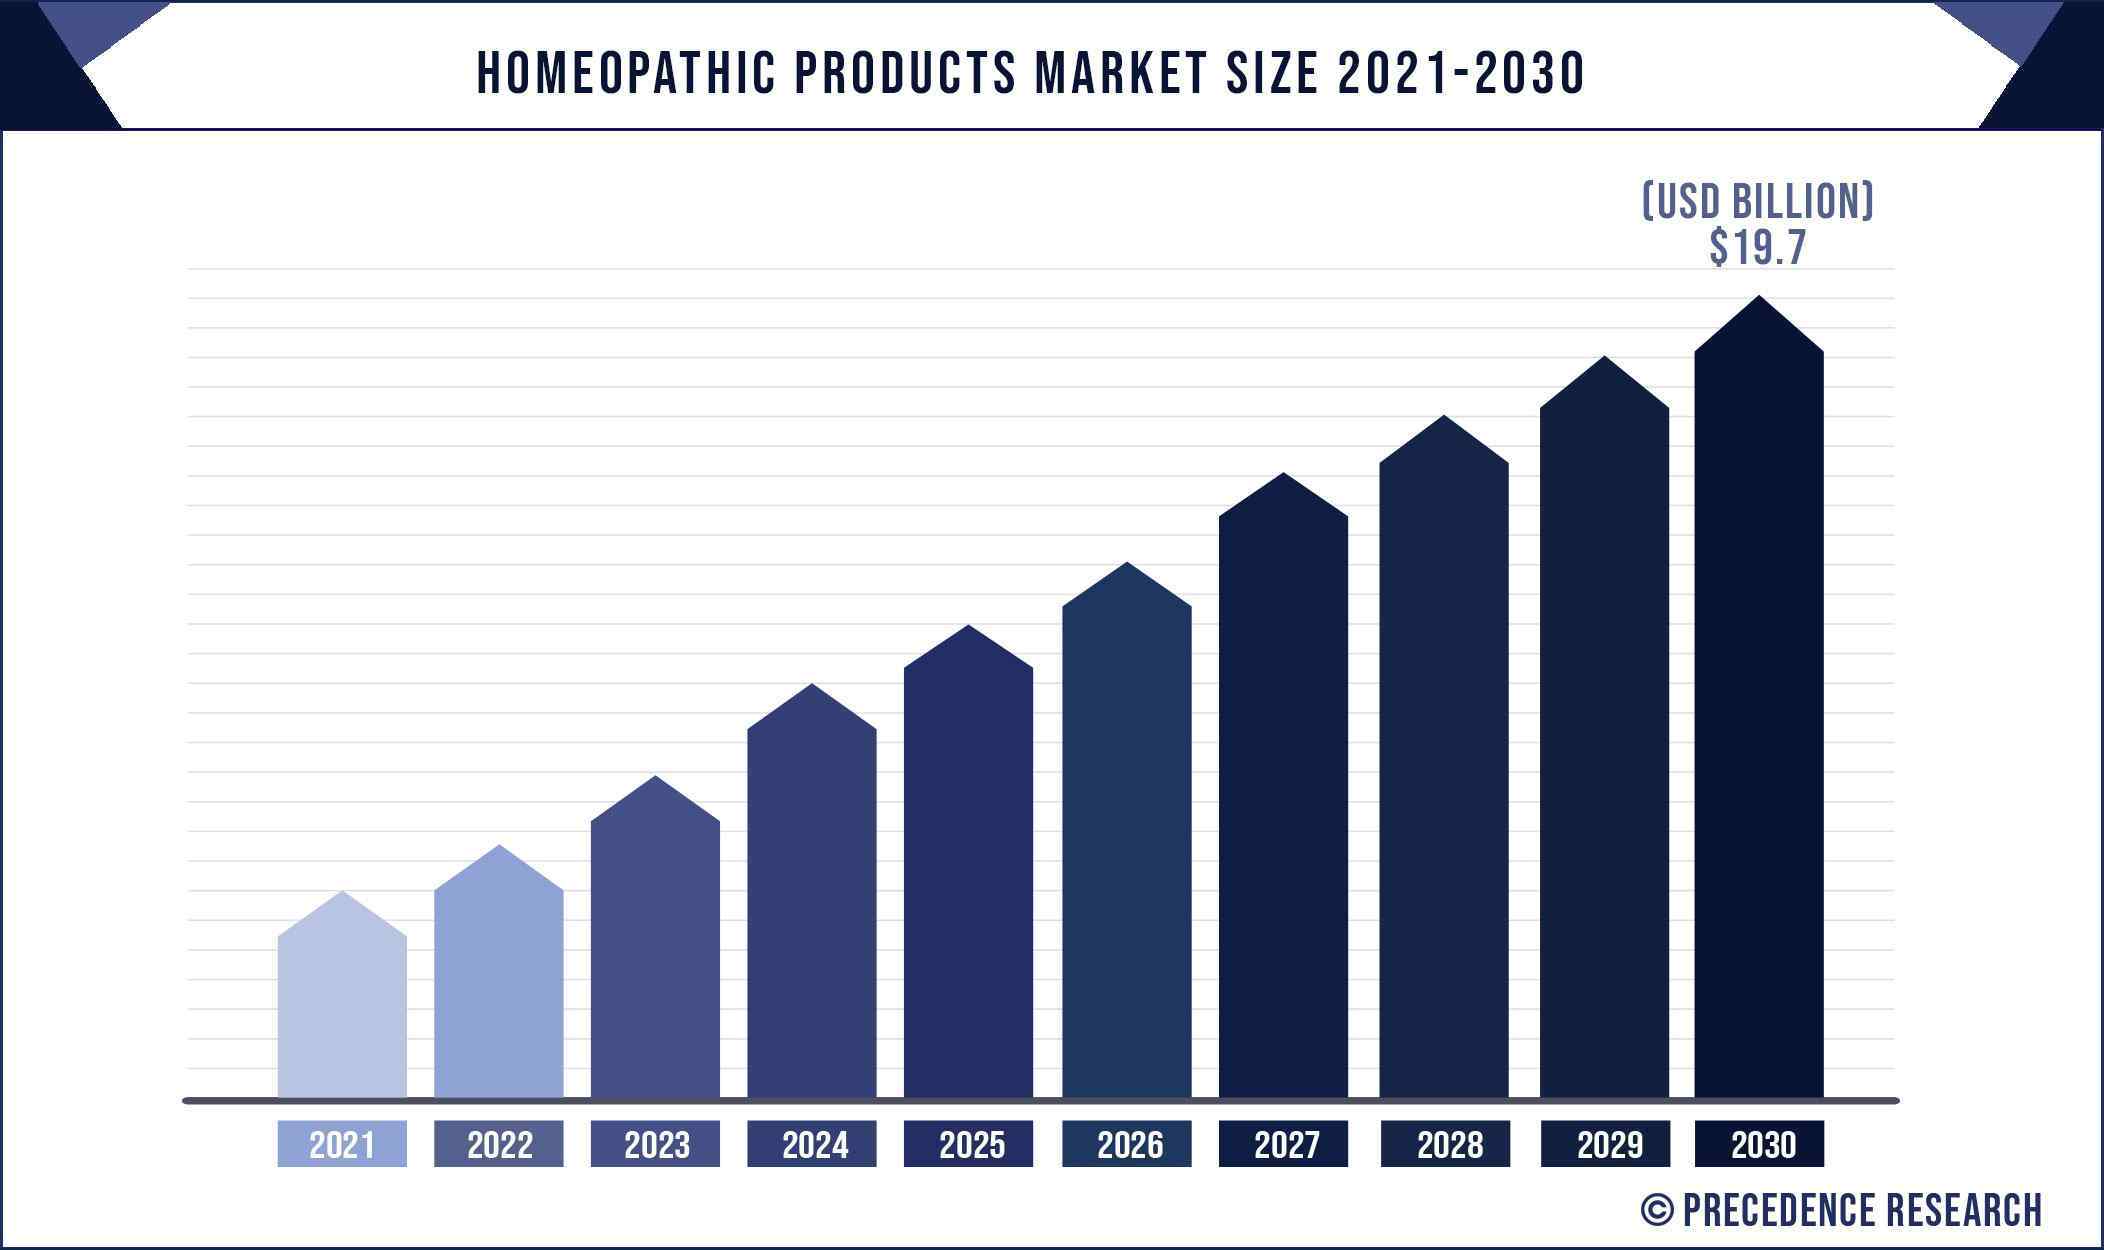 Homeopathic Products Market Size 2021 to 2030